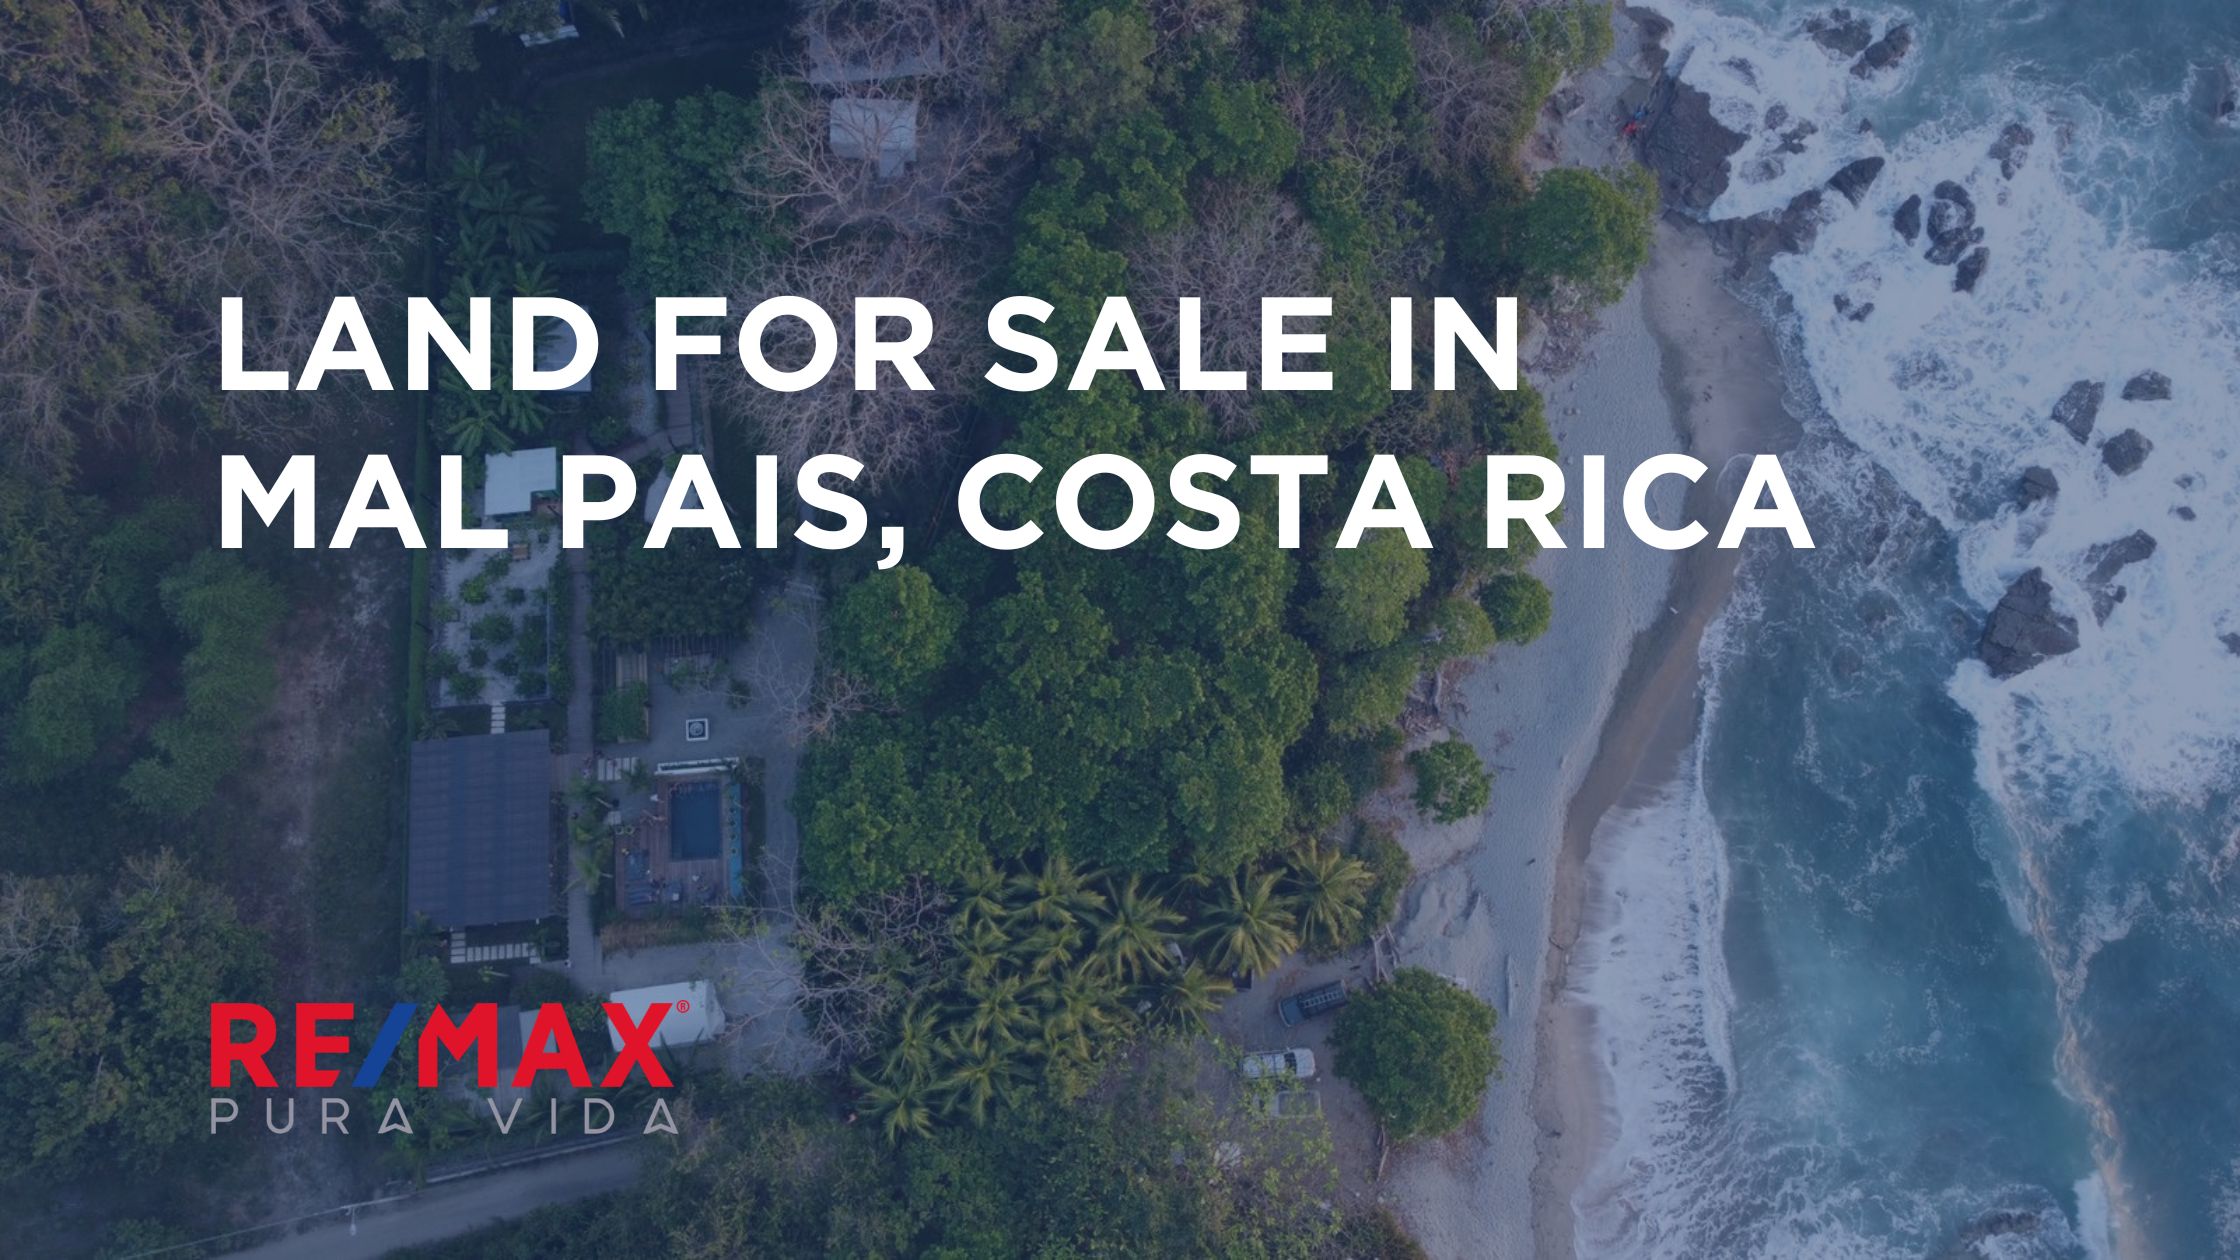 Land for sale in mal pais costa rica